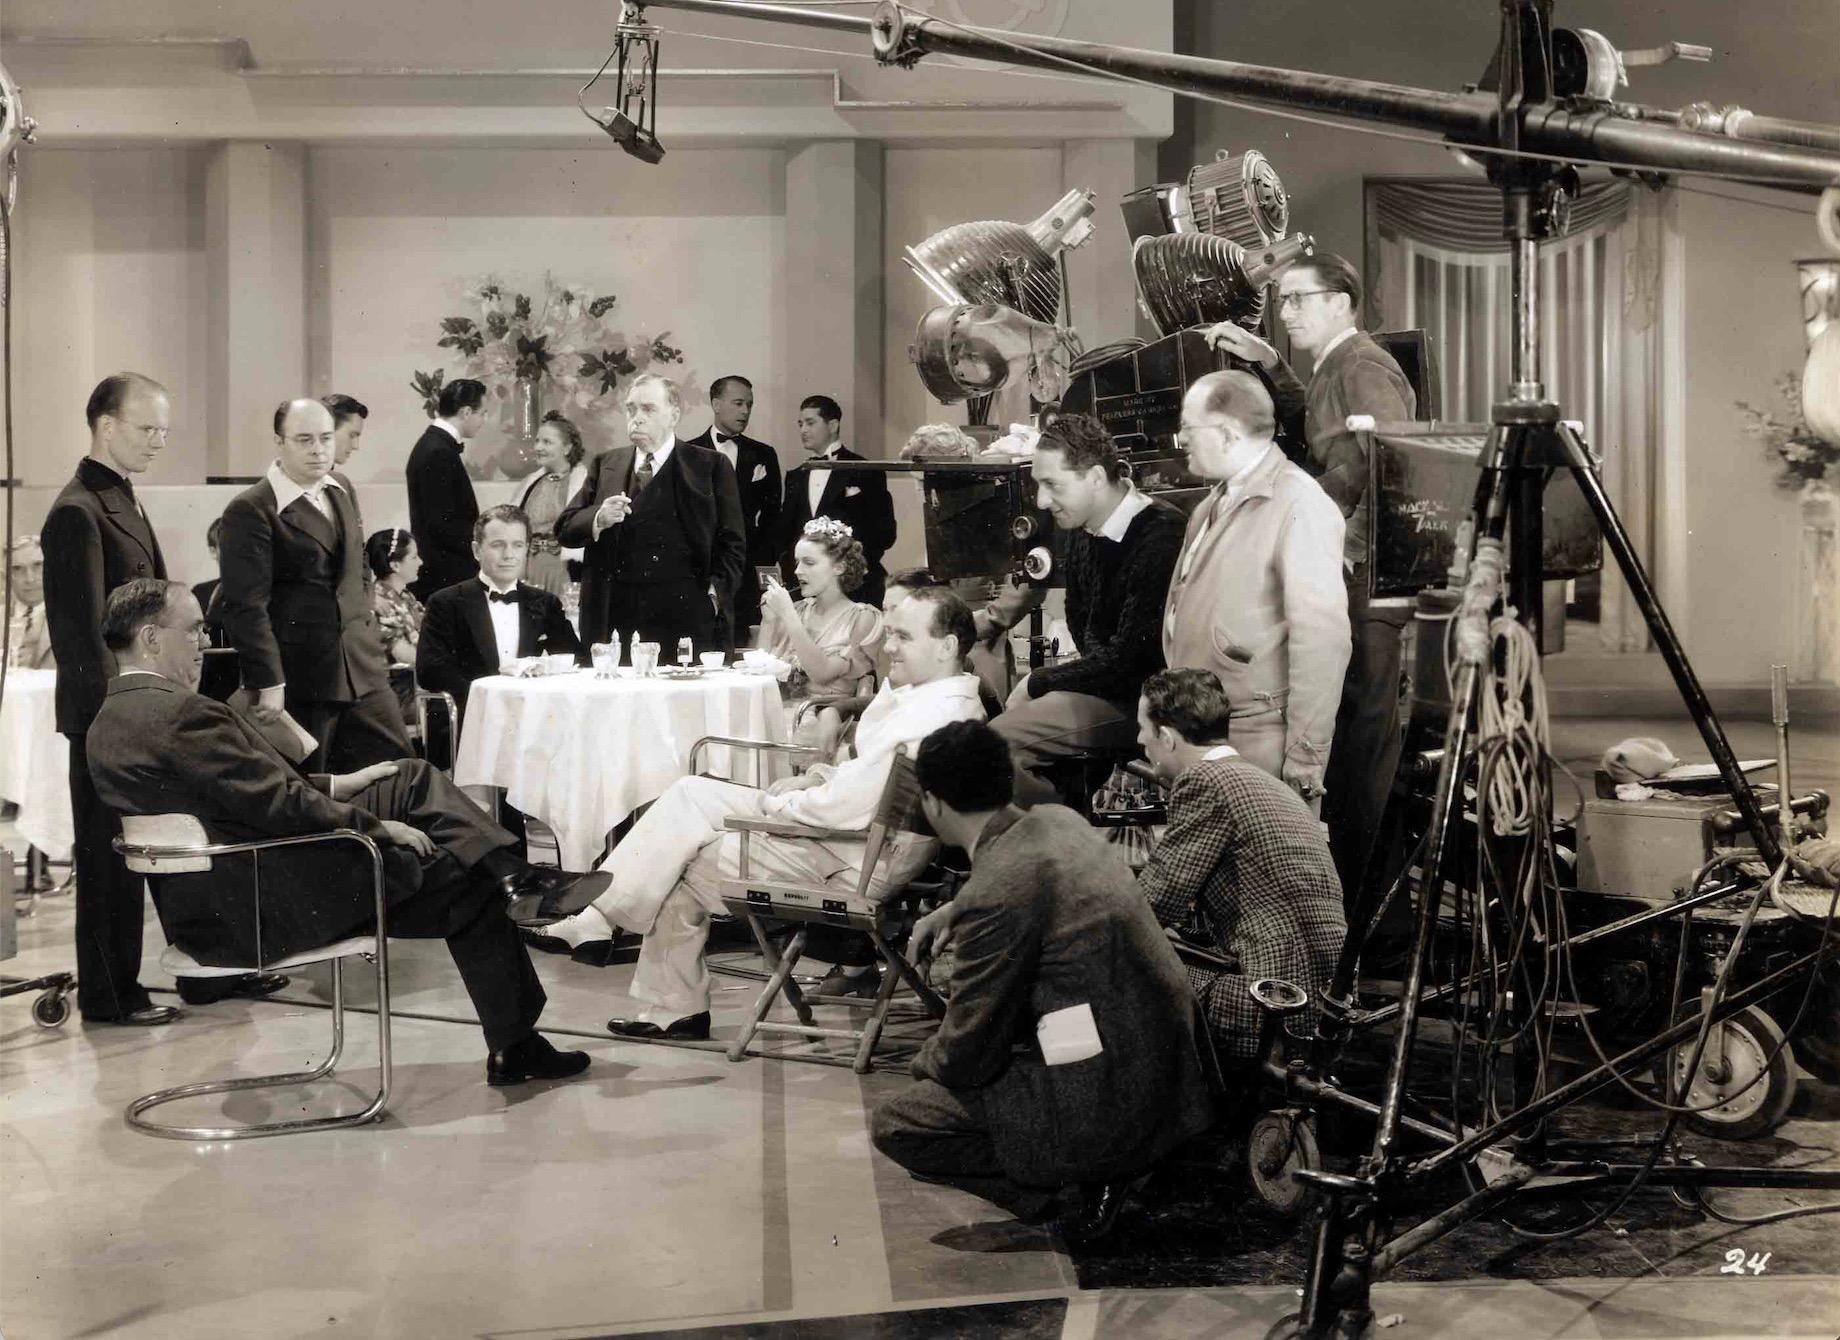 Production photograph from the set of "From Now On," a Tri-State Motion Pictures sponsored film from 1937